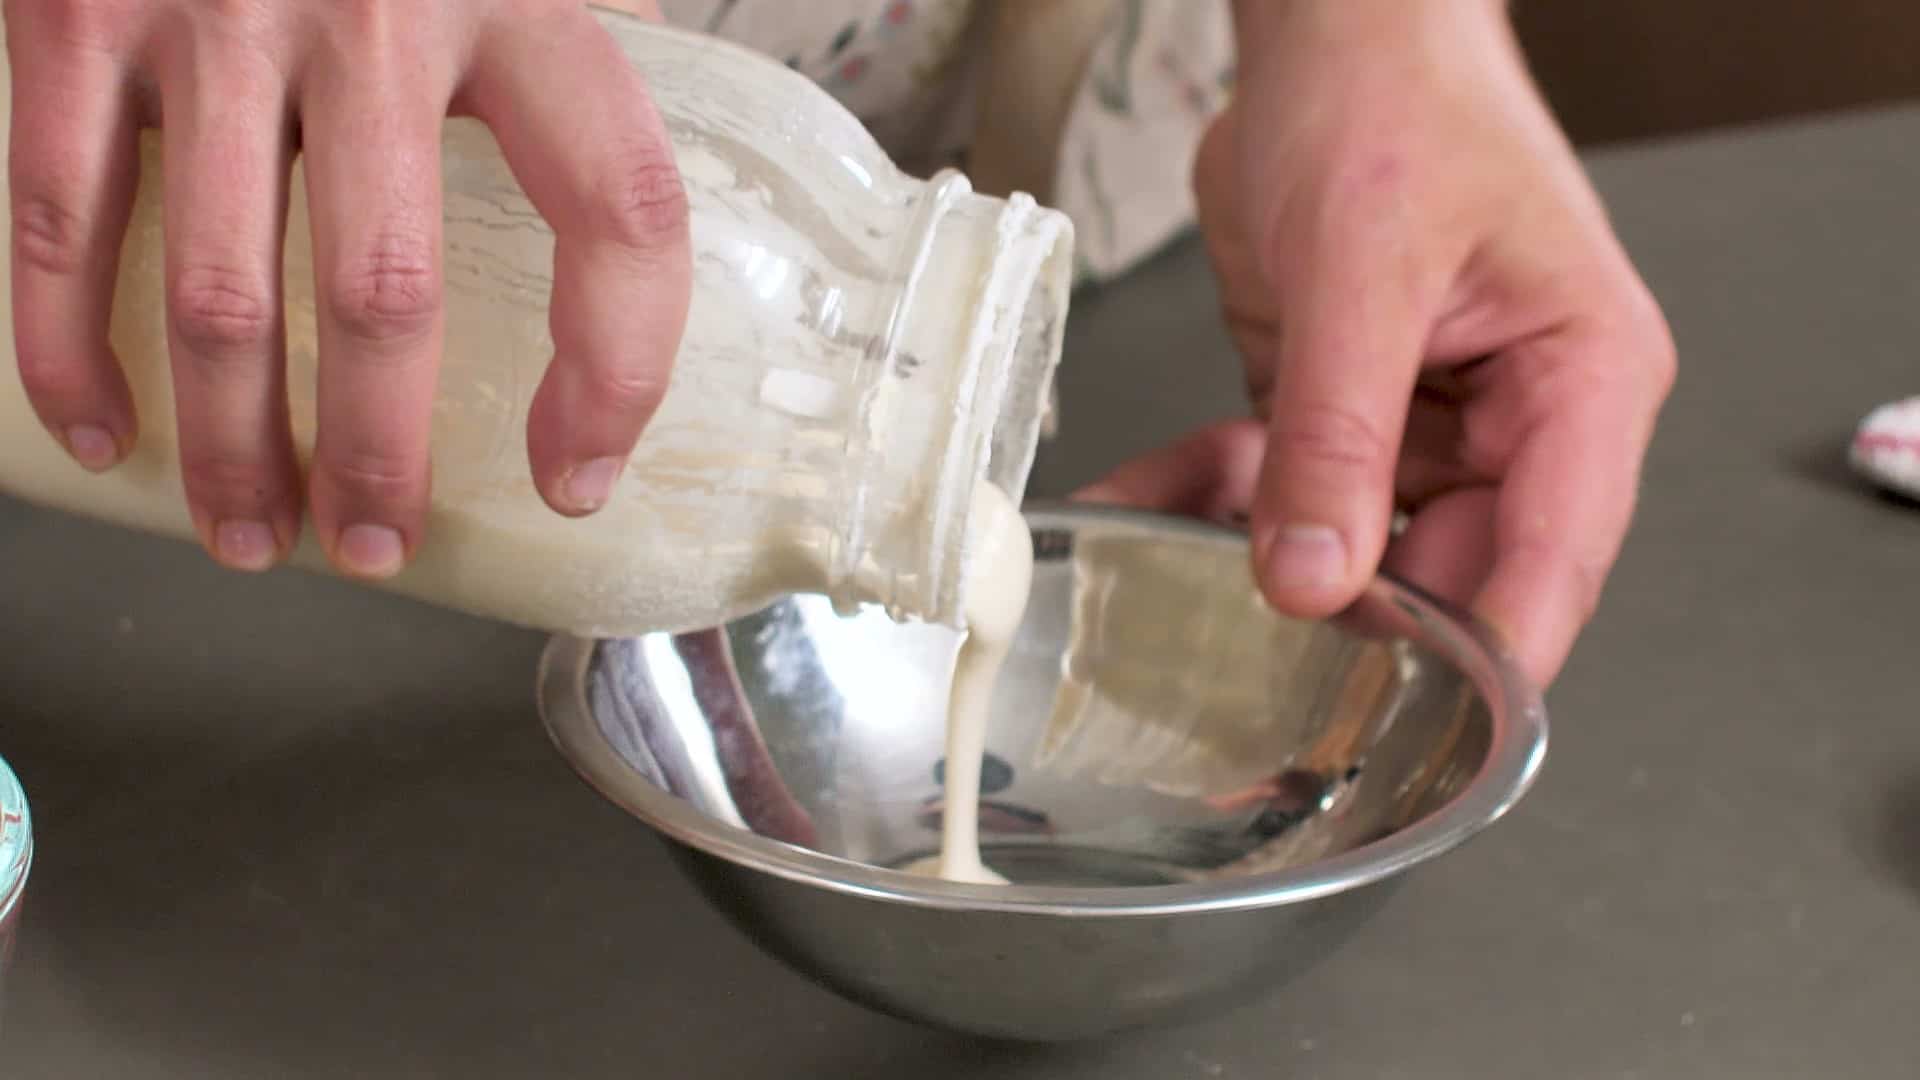 How to Make Your Own Sourdough Starter